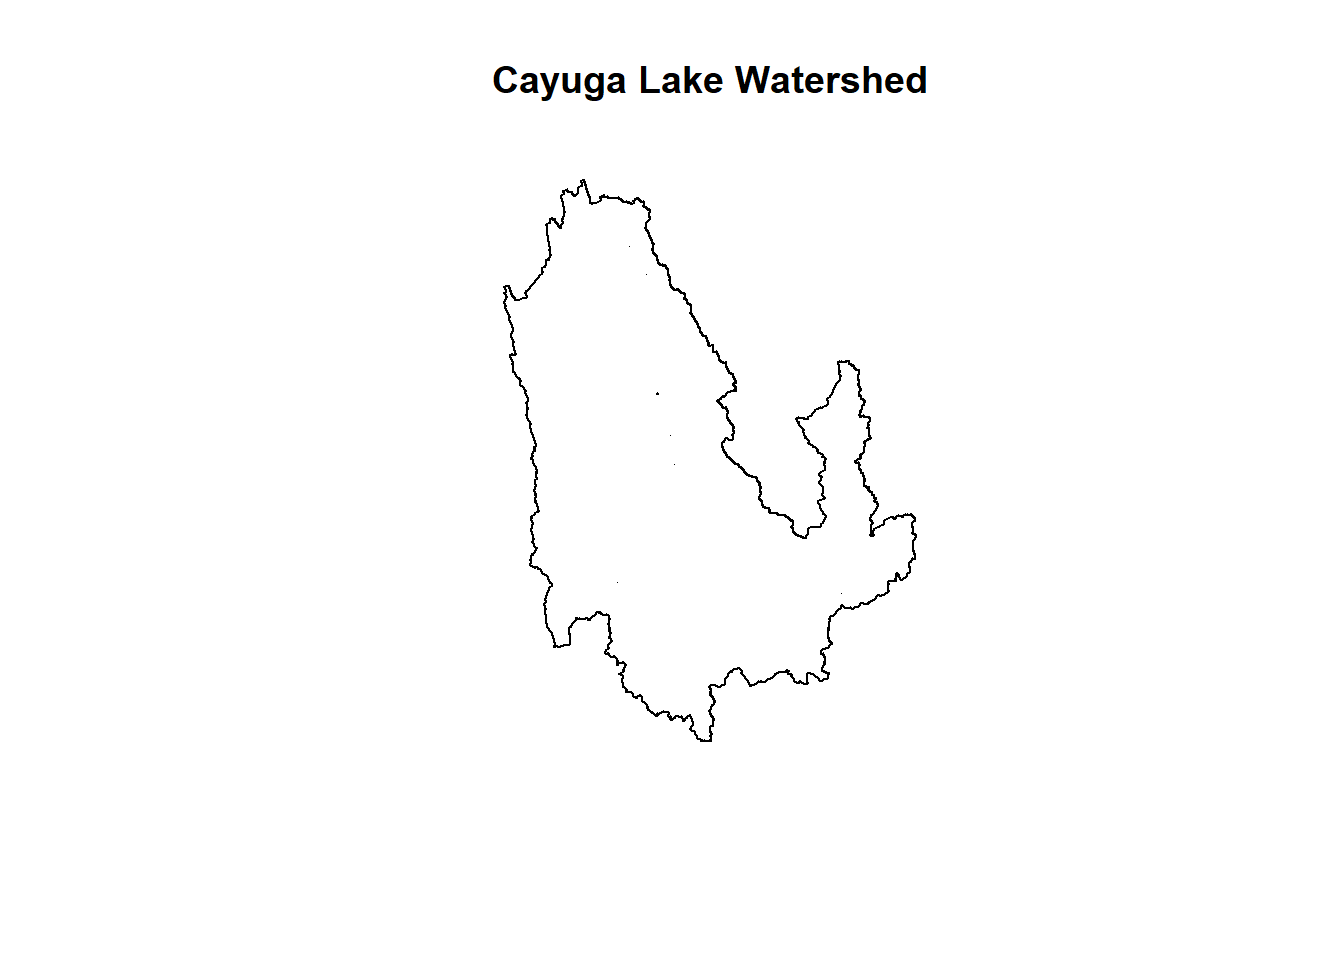 Separation of the Watersheds from Multipolygon